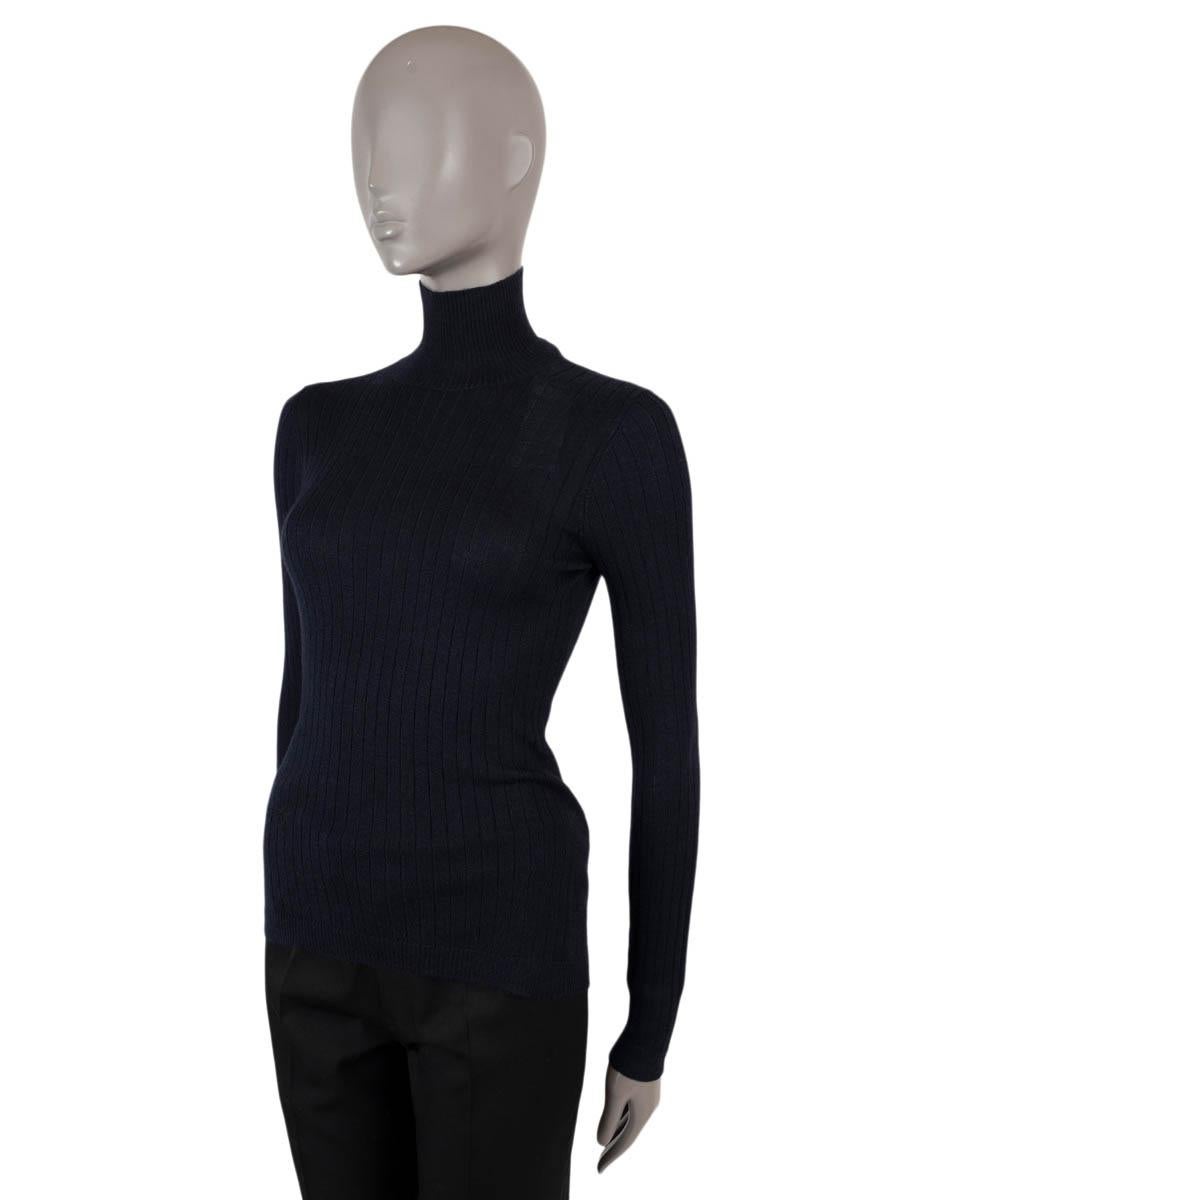 100% authentic Christian Dior rib-knit turtleneck sweater in navy blue cashmere (100% missing tag) featuring black embroidered bee emblem. Has been worn and is in virtually new condition.

Measurements
Tag Size	Missing
Size	S
Shoulder Width	35cm